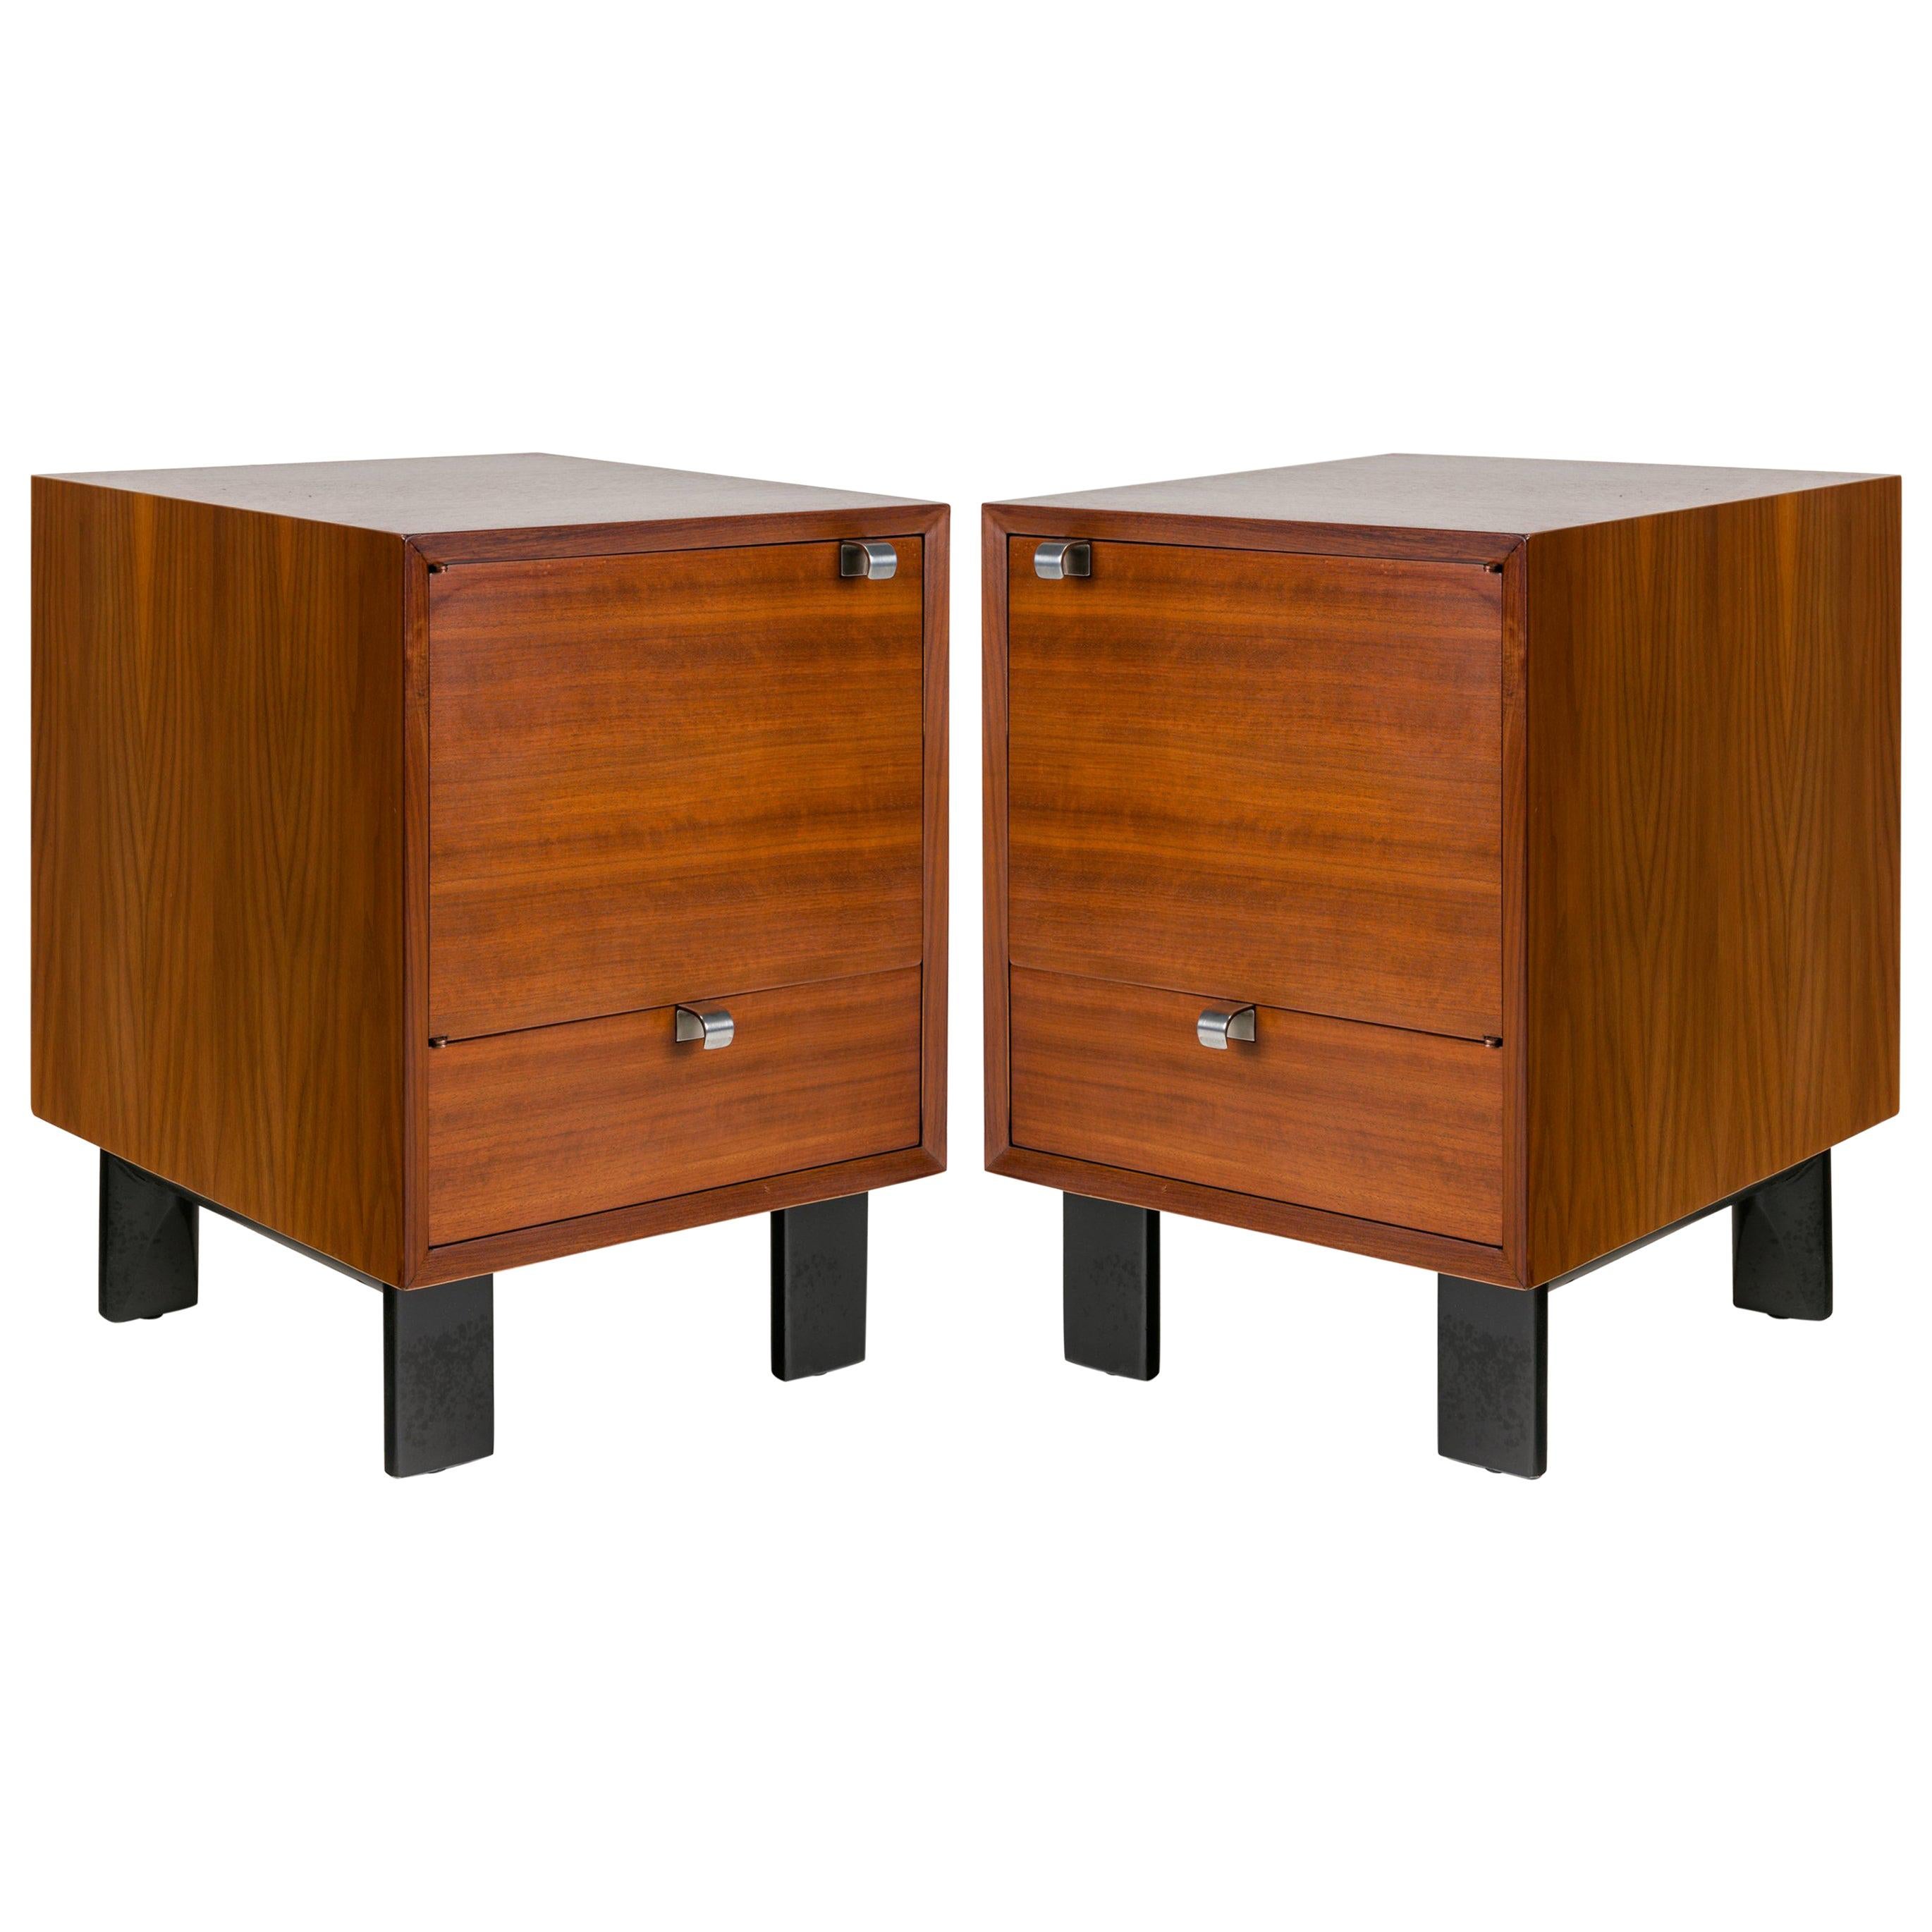 George Nelson Walnut Nightstands for Herman Miller, USA, 1950s